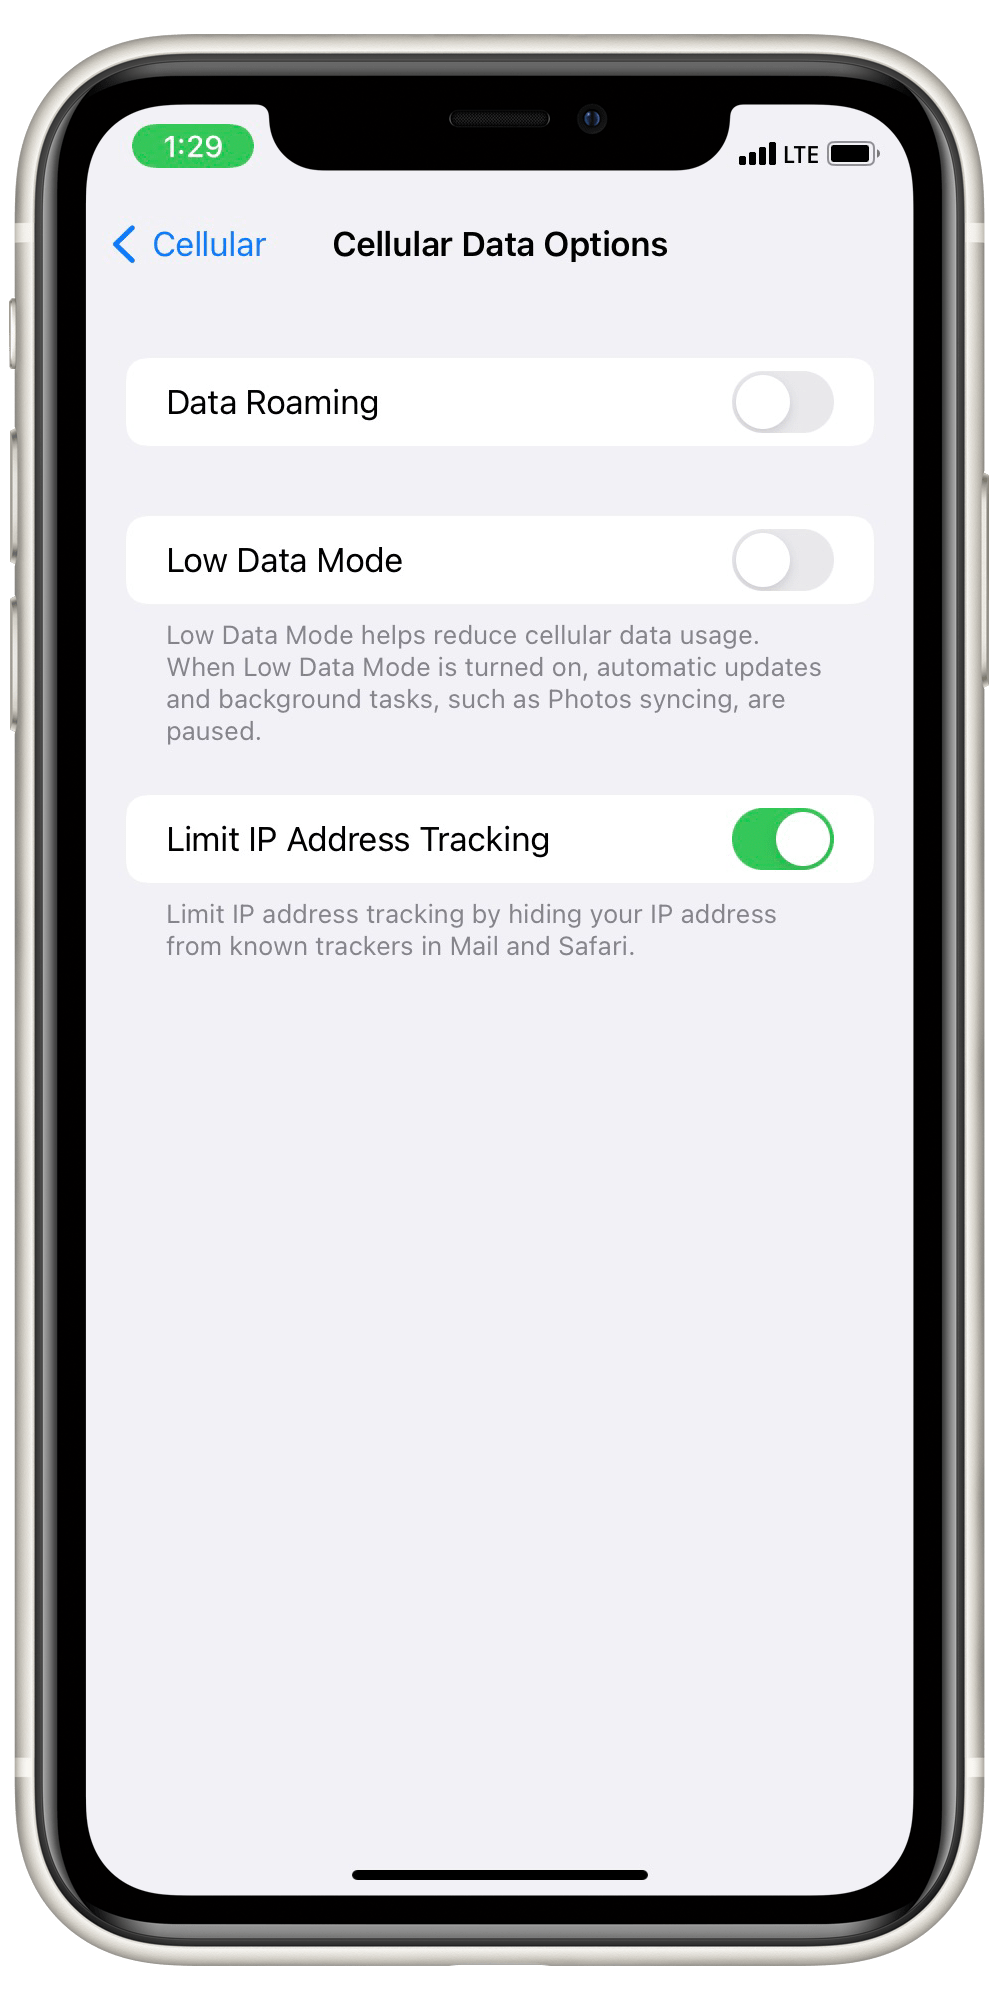 cellular data options in iPhone settings